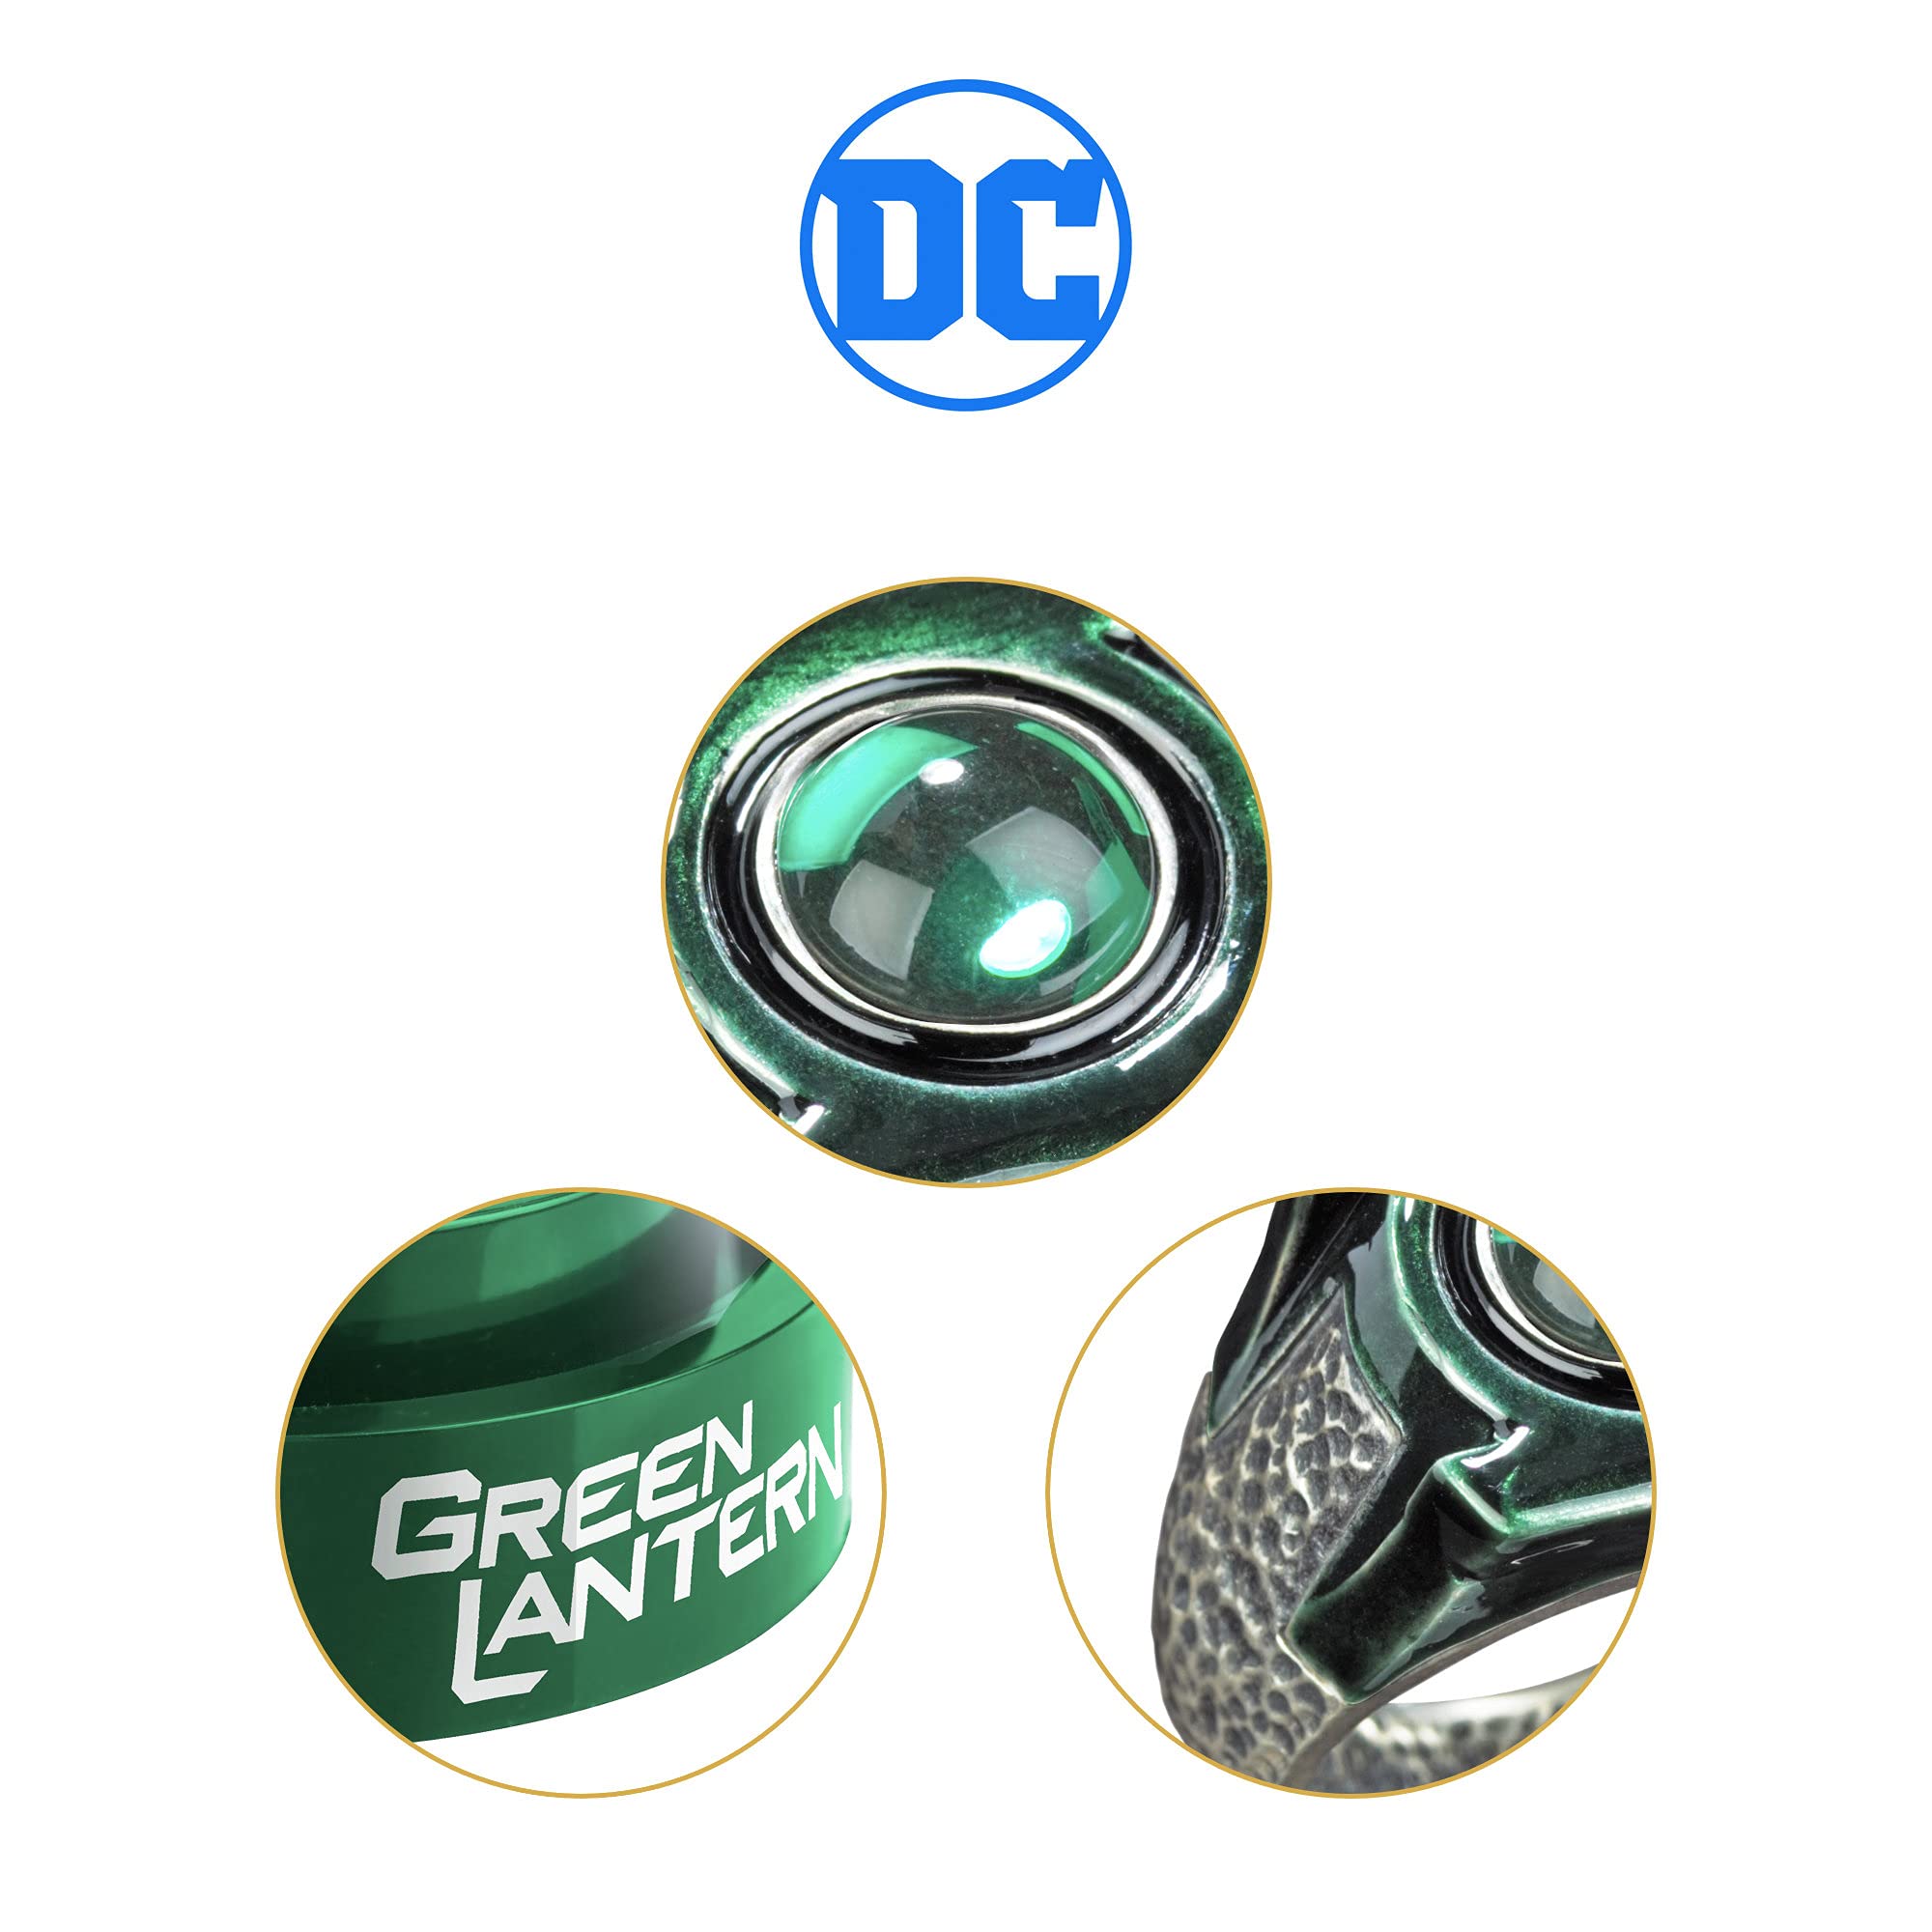 The Noble Collection DC Green Lantern Prop Ring & Display - Die Cast Metal Ring with 4in (10cm) Display Case - Officially Licensed Film Set Movie Props Gifts Jewellery